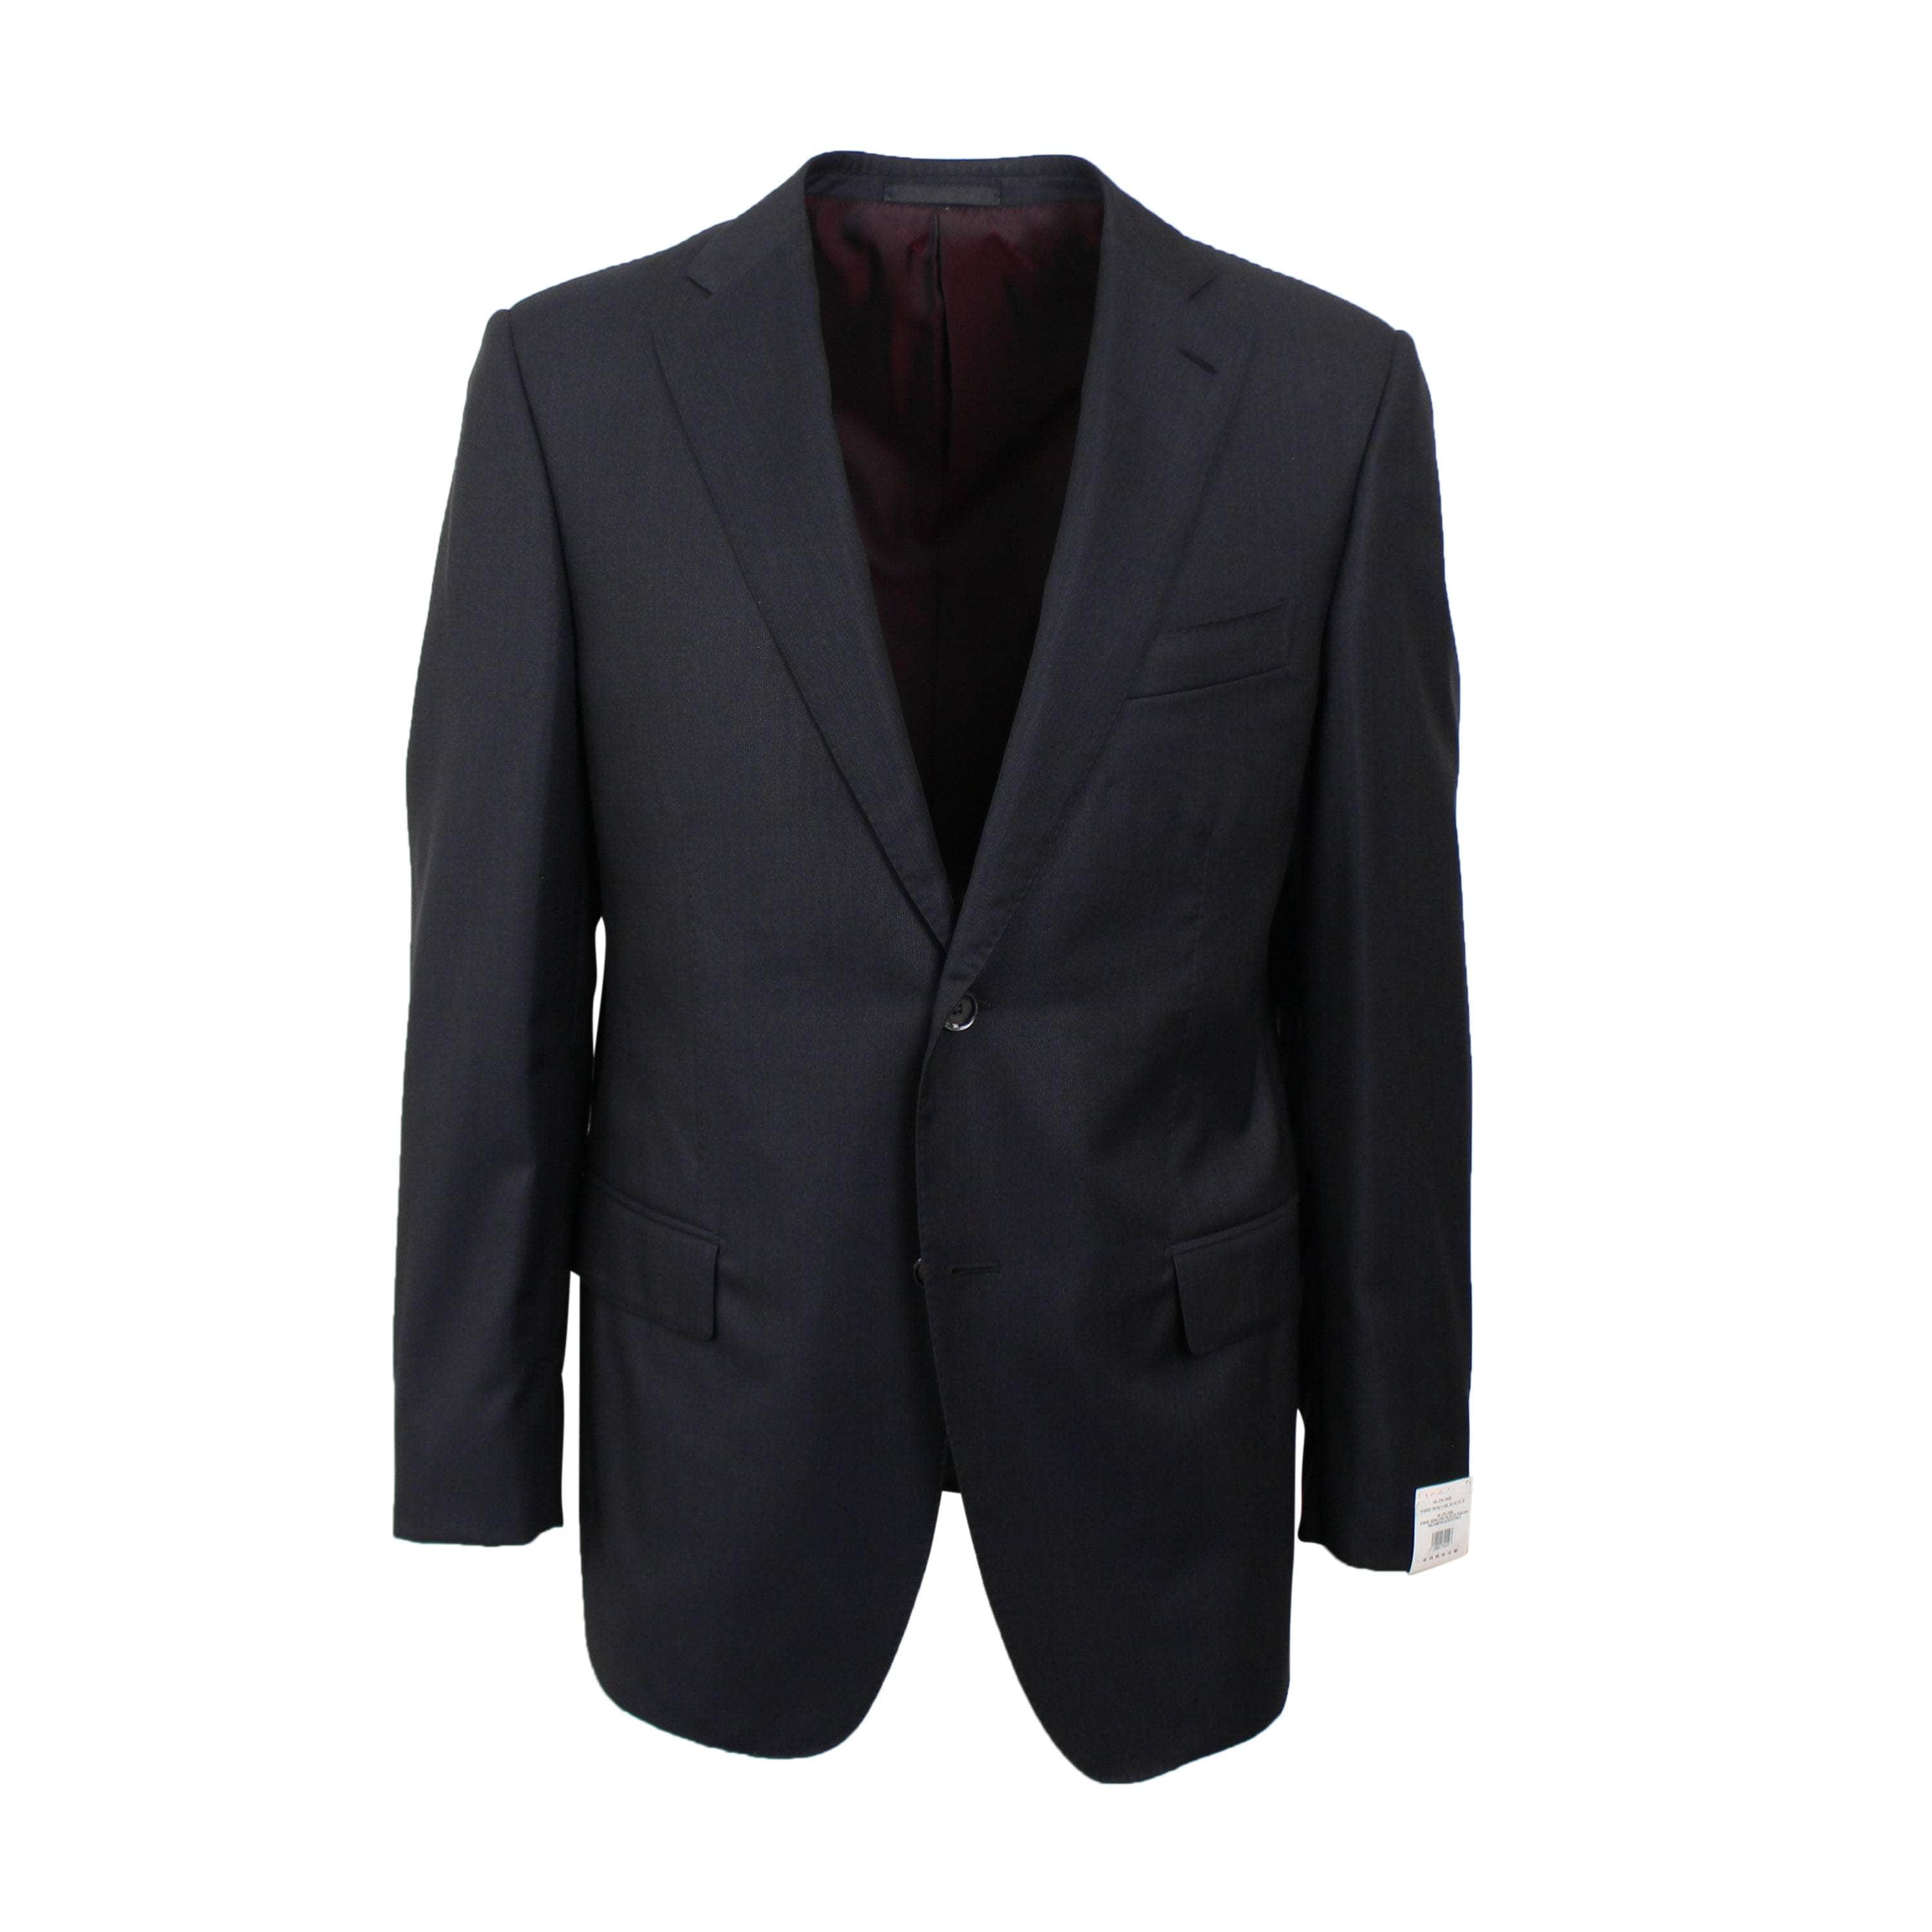 Caruso 500-750, caruso, channelenable-all, chicmi, couponcollection, main-clothing, shop375, size-50, Stadium Goods, stadiumgoods 50 Black Single Breasted Wool and Silk Suit 7R CRS-XTPS-0190/50 CRS-XTPS-0190/50